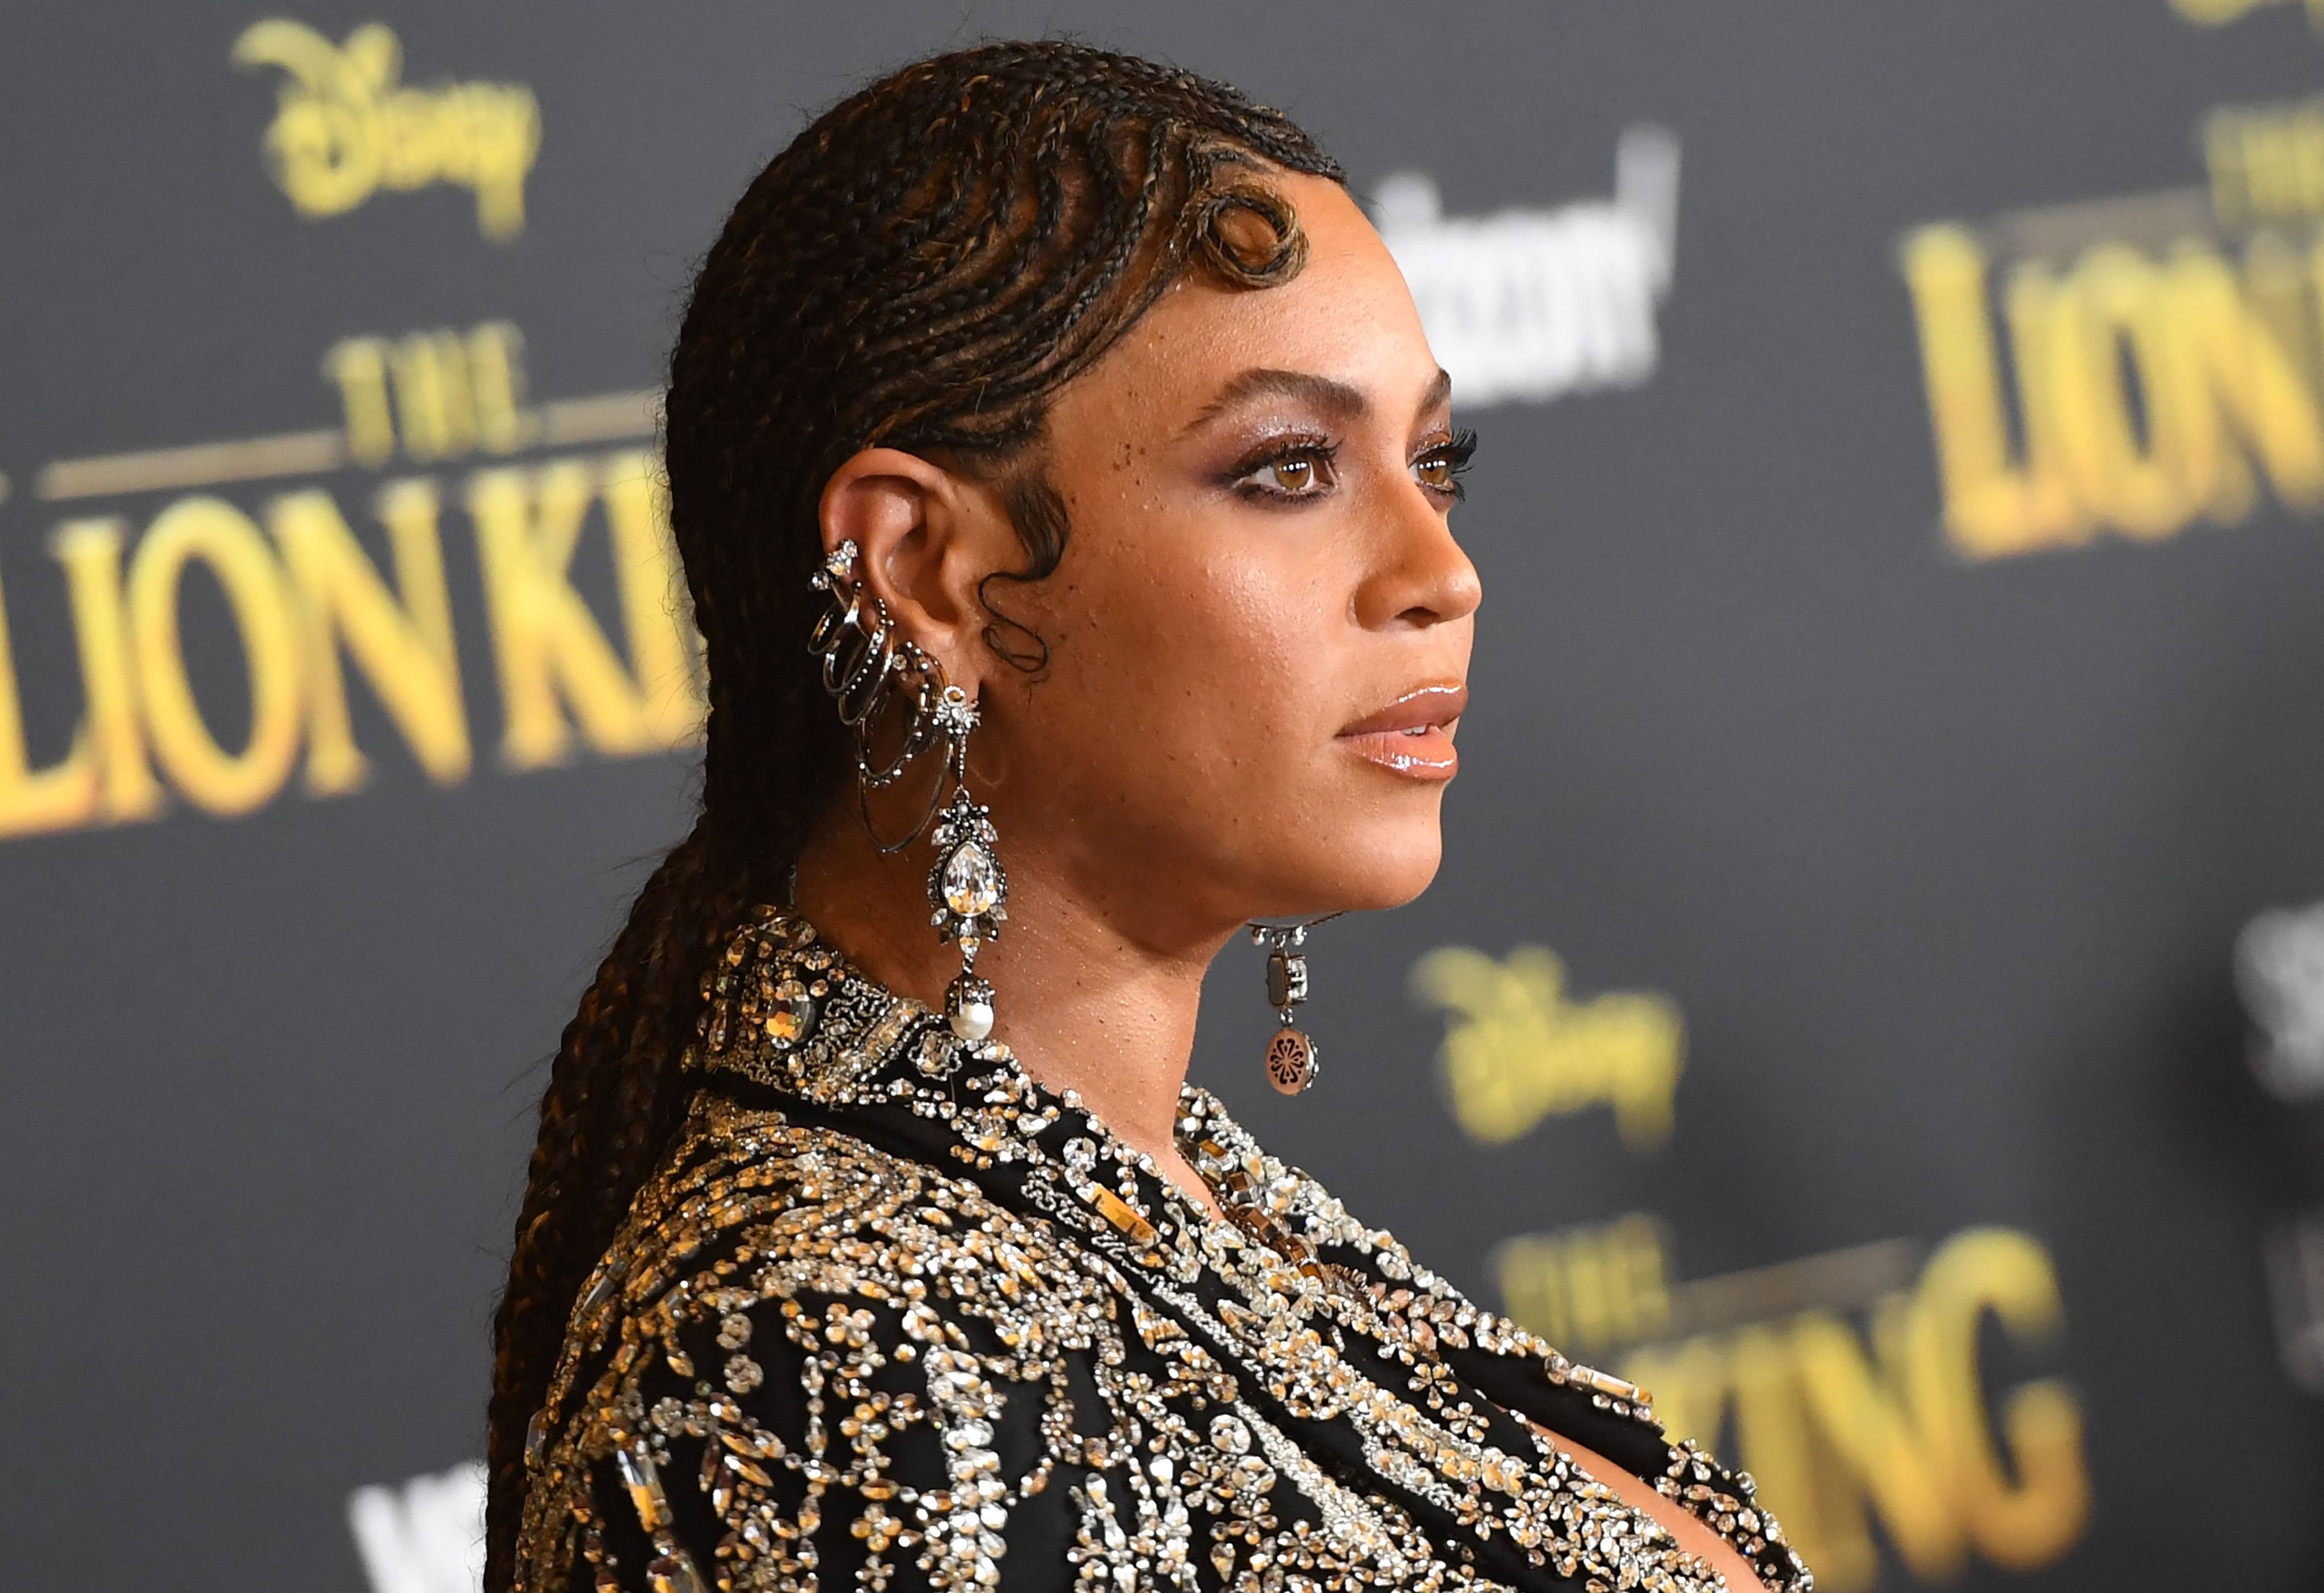 A file photo of Beyonce from July 2019. The US singer and songwriter is reported to have charged US$24 million to perform for a VIP audience in Dubai. Photo: AFP